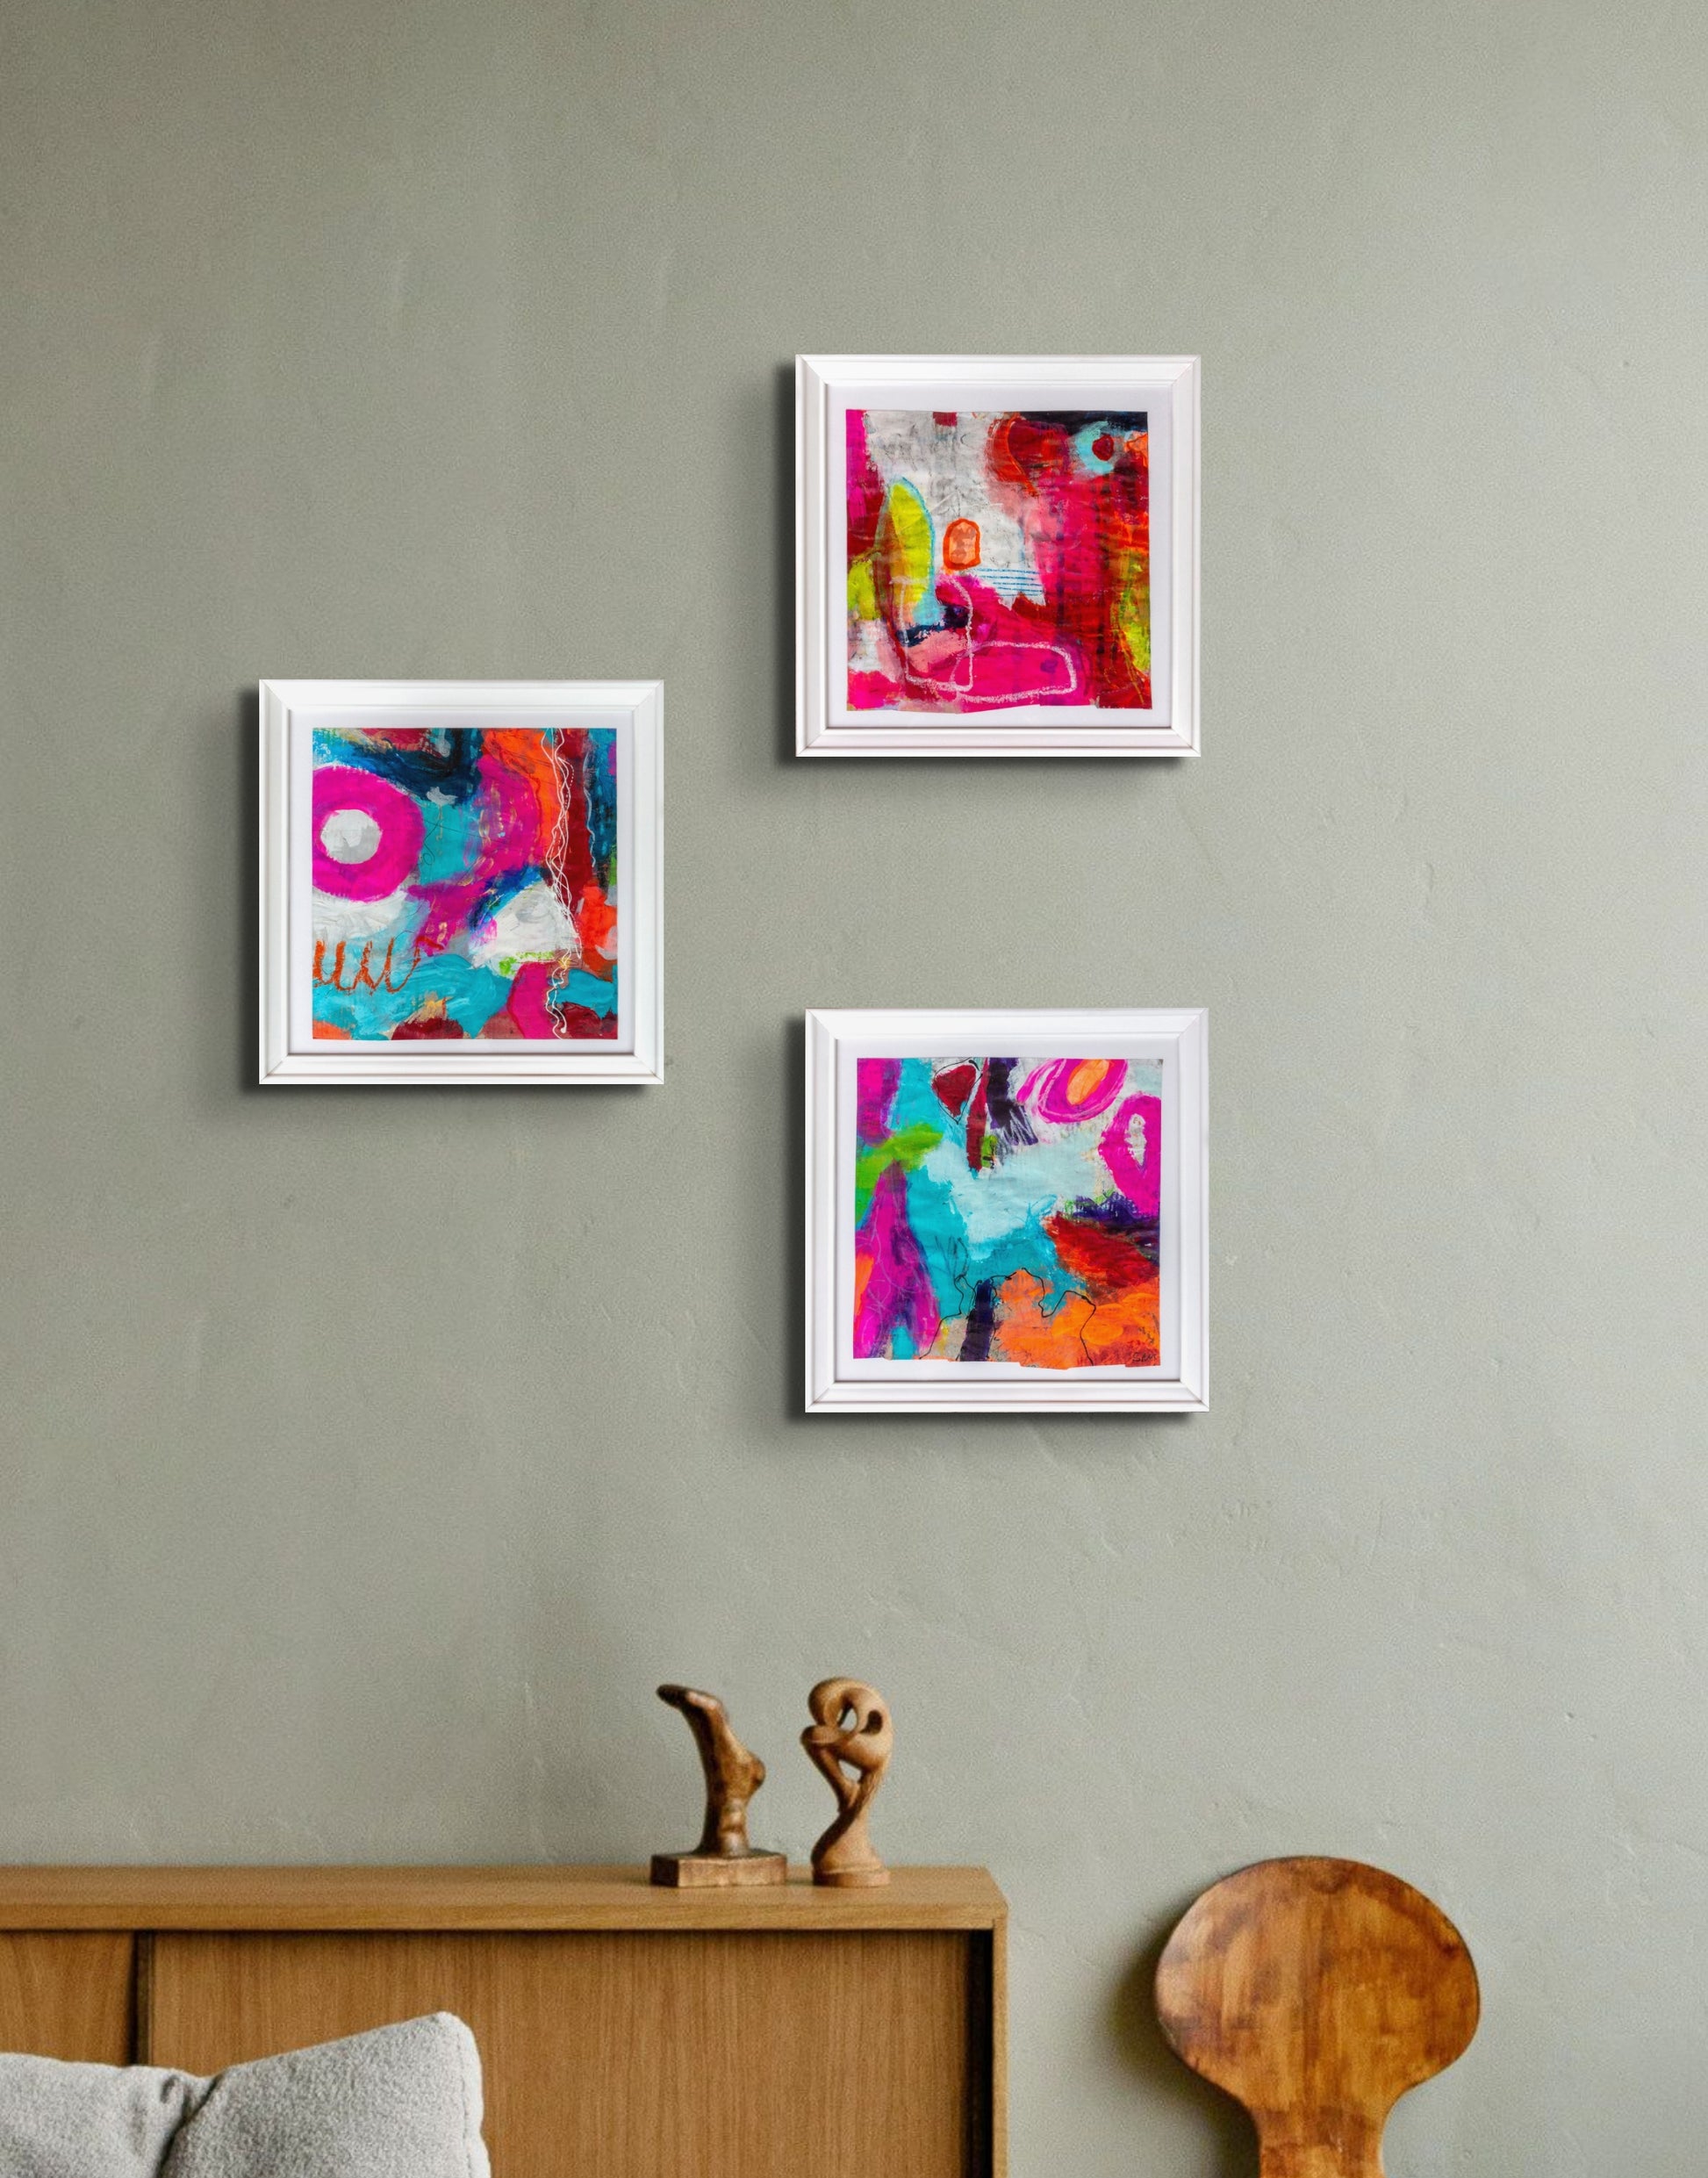 Colorful acrylic abstract painting on paper titled 'Workshop 10' by artist Steffi Möllers; measures app 7.5"x7.5", w/frame 10"x10"; image is shown in situ hanging on wall with two add'l abstracts from same artist.